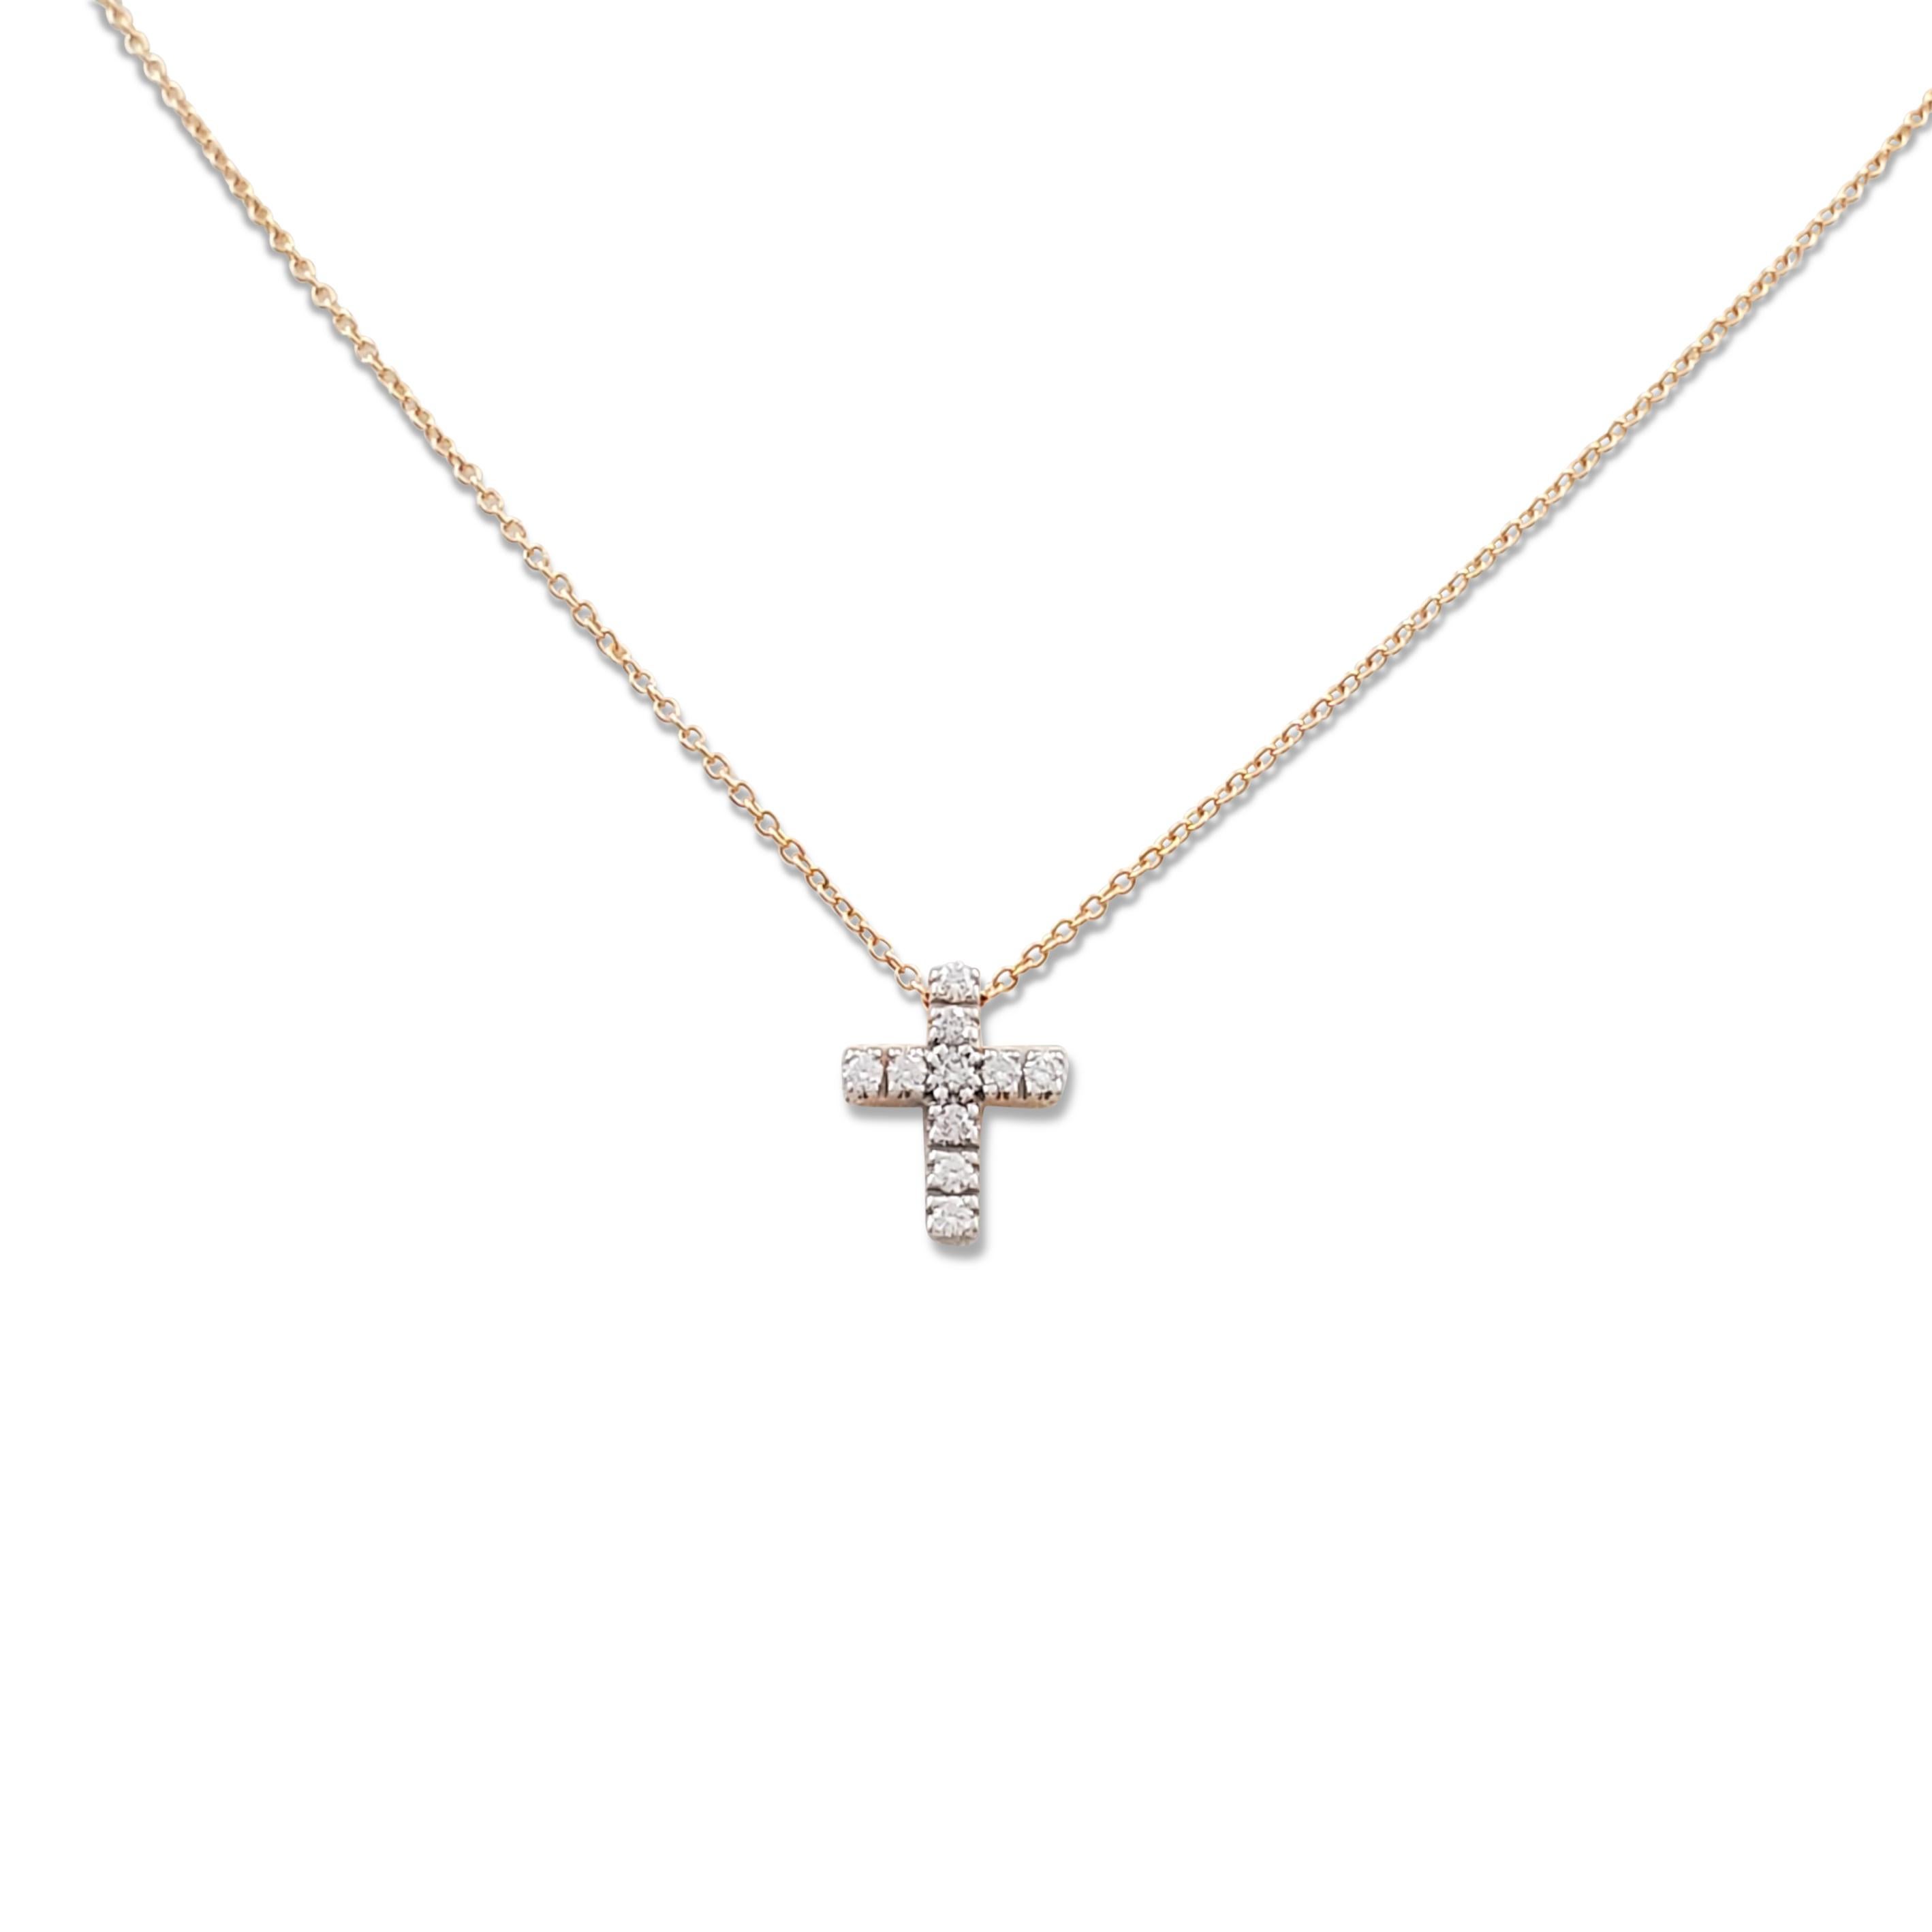 Authentic Pomellato cross pendant necklace crafted in 18 karat rose gold and set with an estimated 0.15 carats of round brilliant cut diamonds (E-F color, VS clarity). Signed Pomellato, 750, with serial number. The necklace measures 15 1/2 inches in